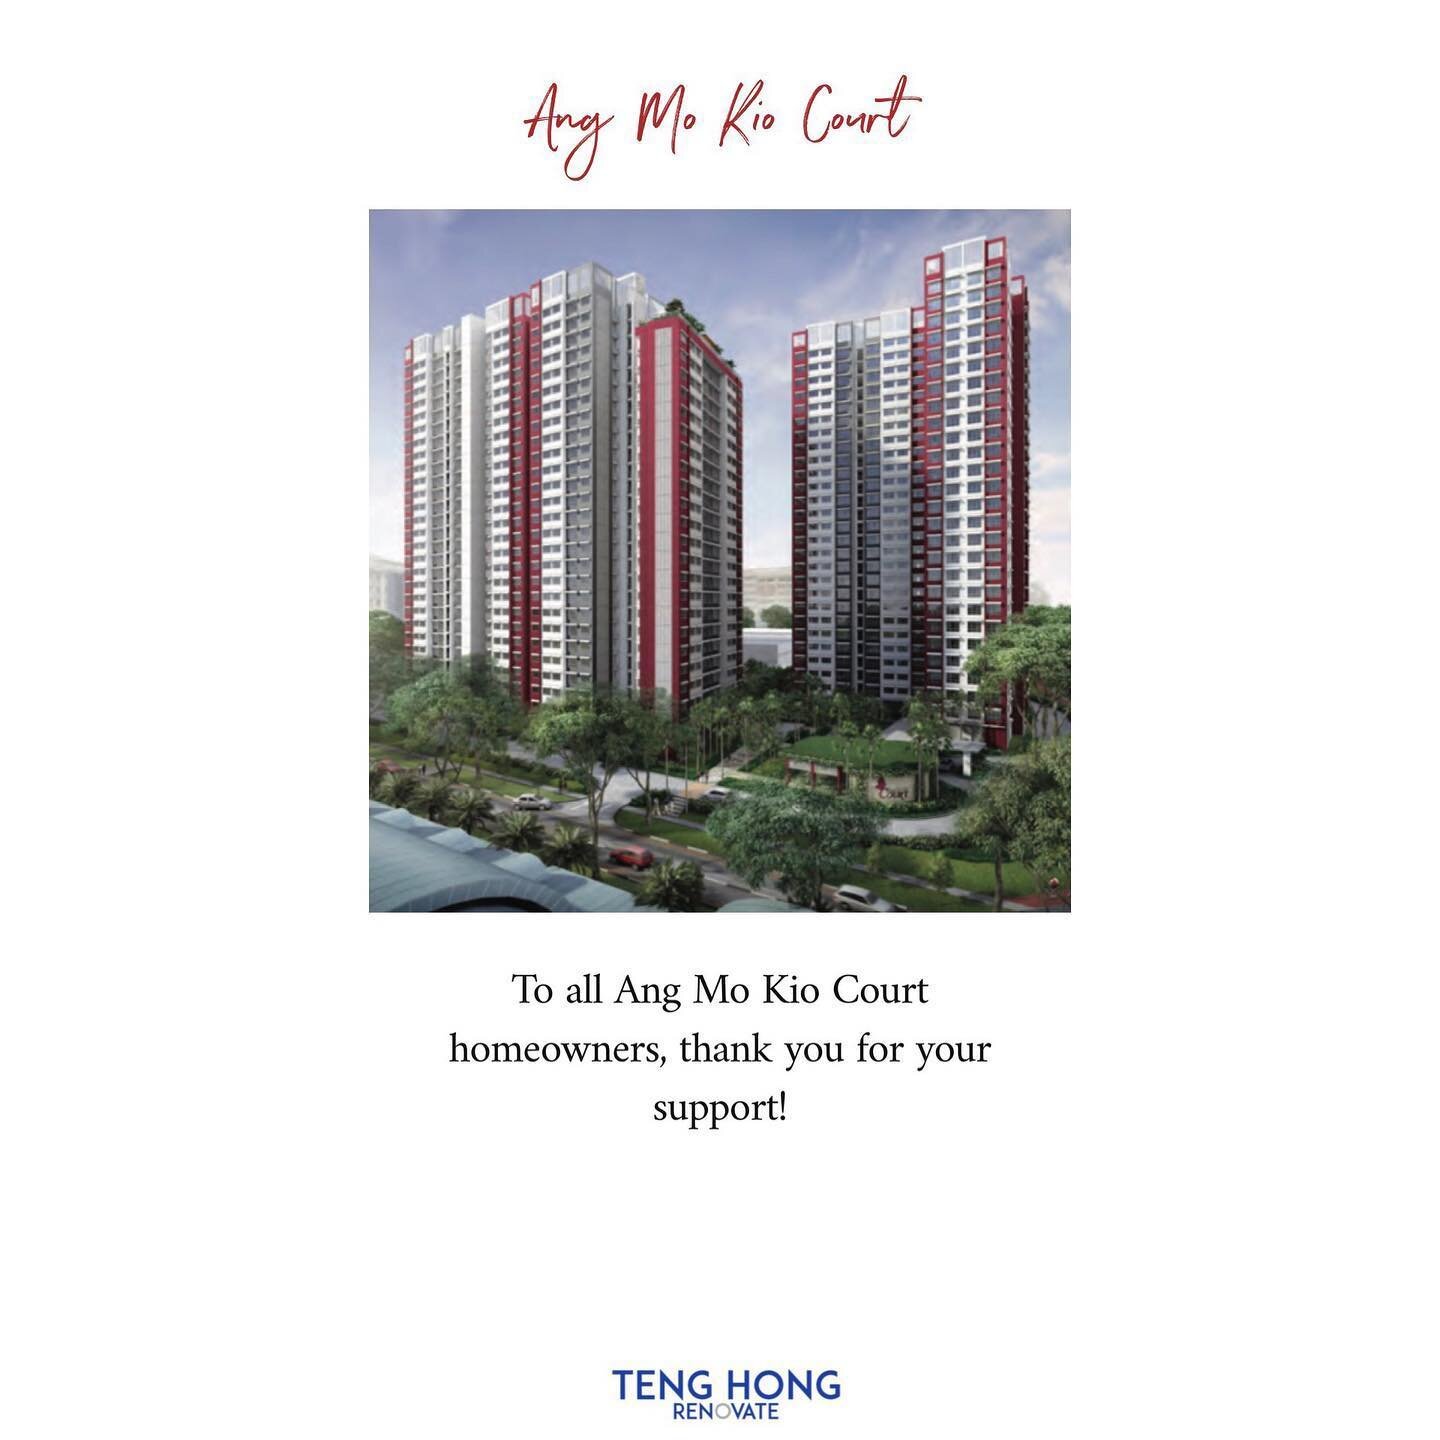 A special deal for our Ang Mo Kio Court homeowners due to overwhelming responses.

For those who are collecting keys in other BTO projects and are interested in this deal, you can DM us for more info. T&amp;C applies. #angmokiocourt #bto